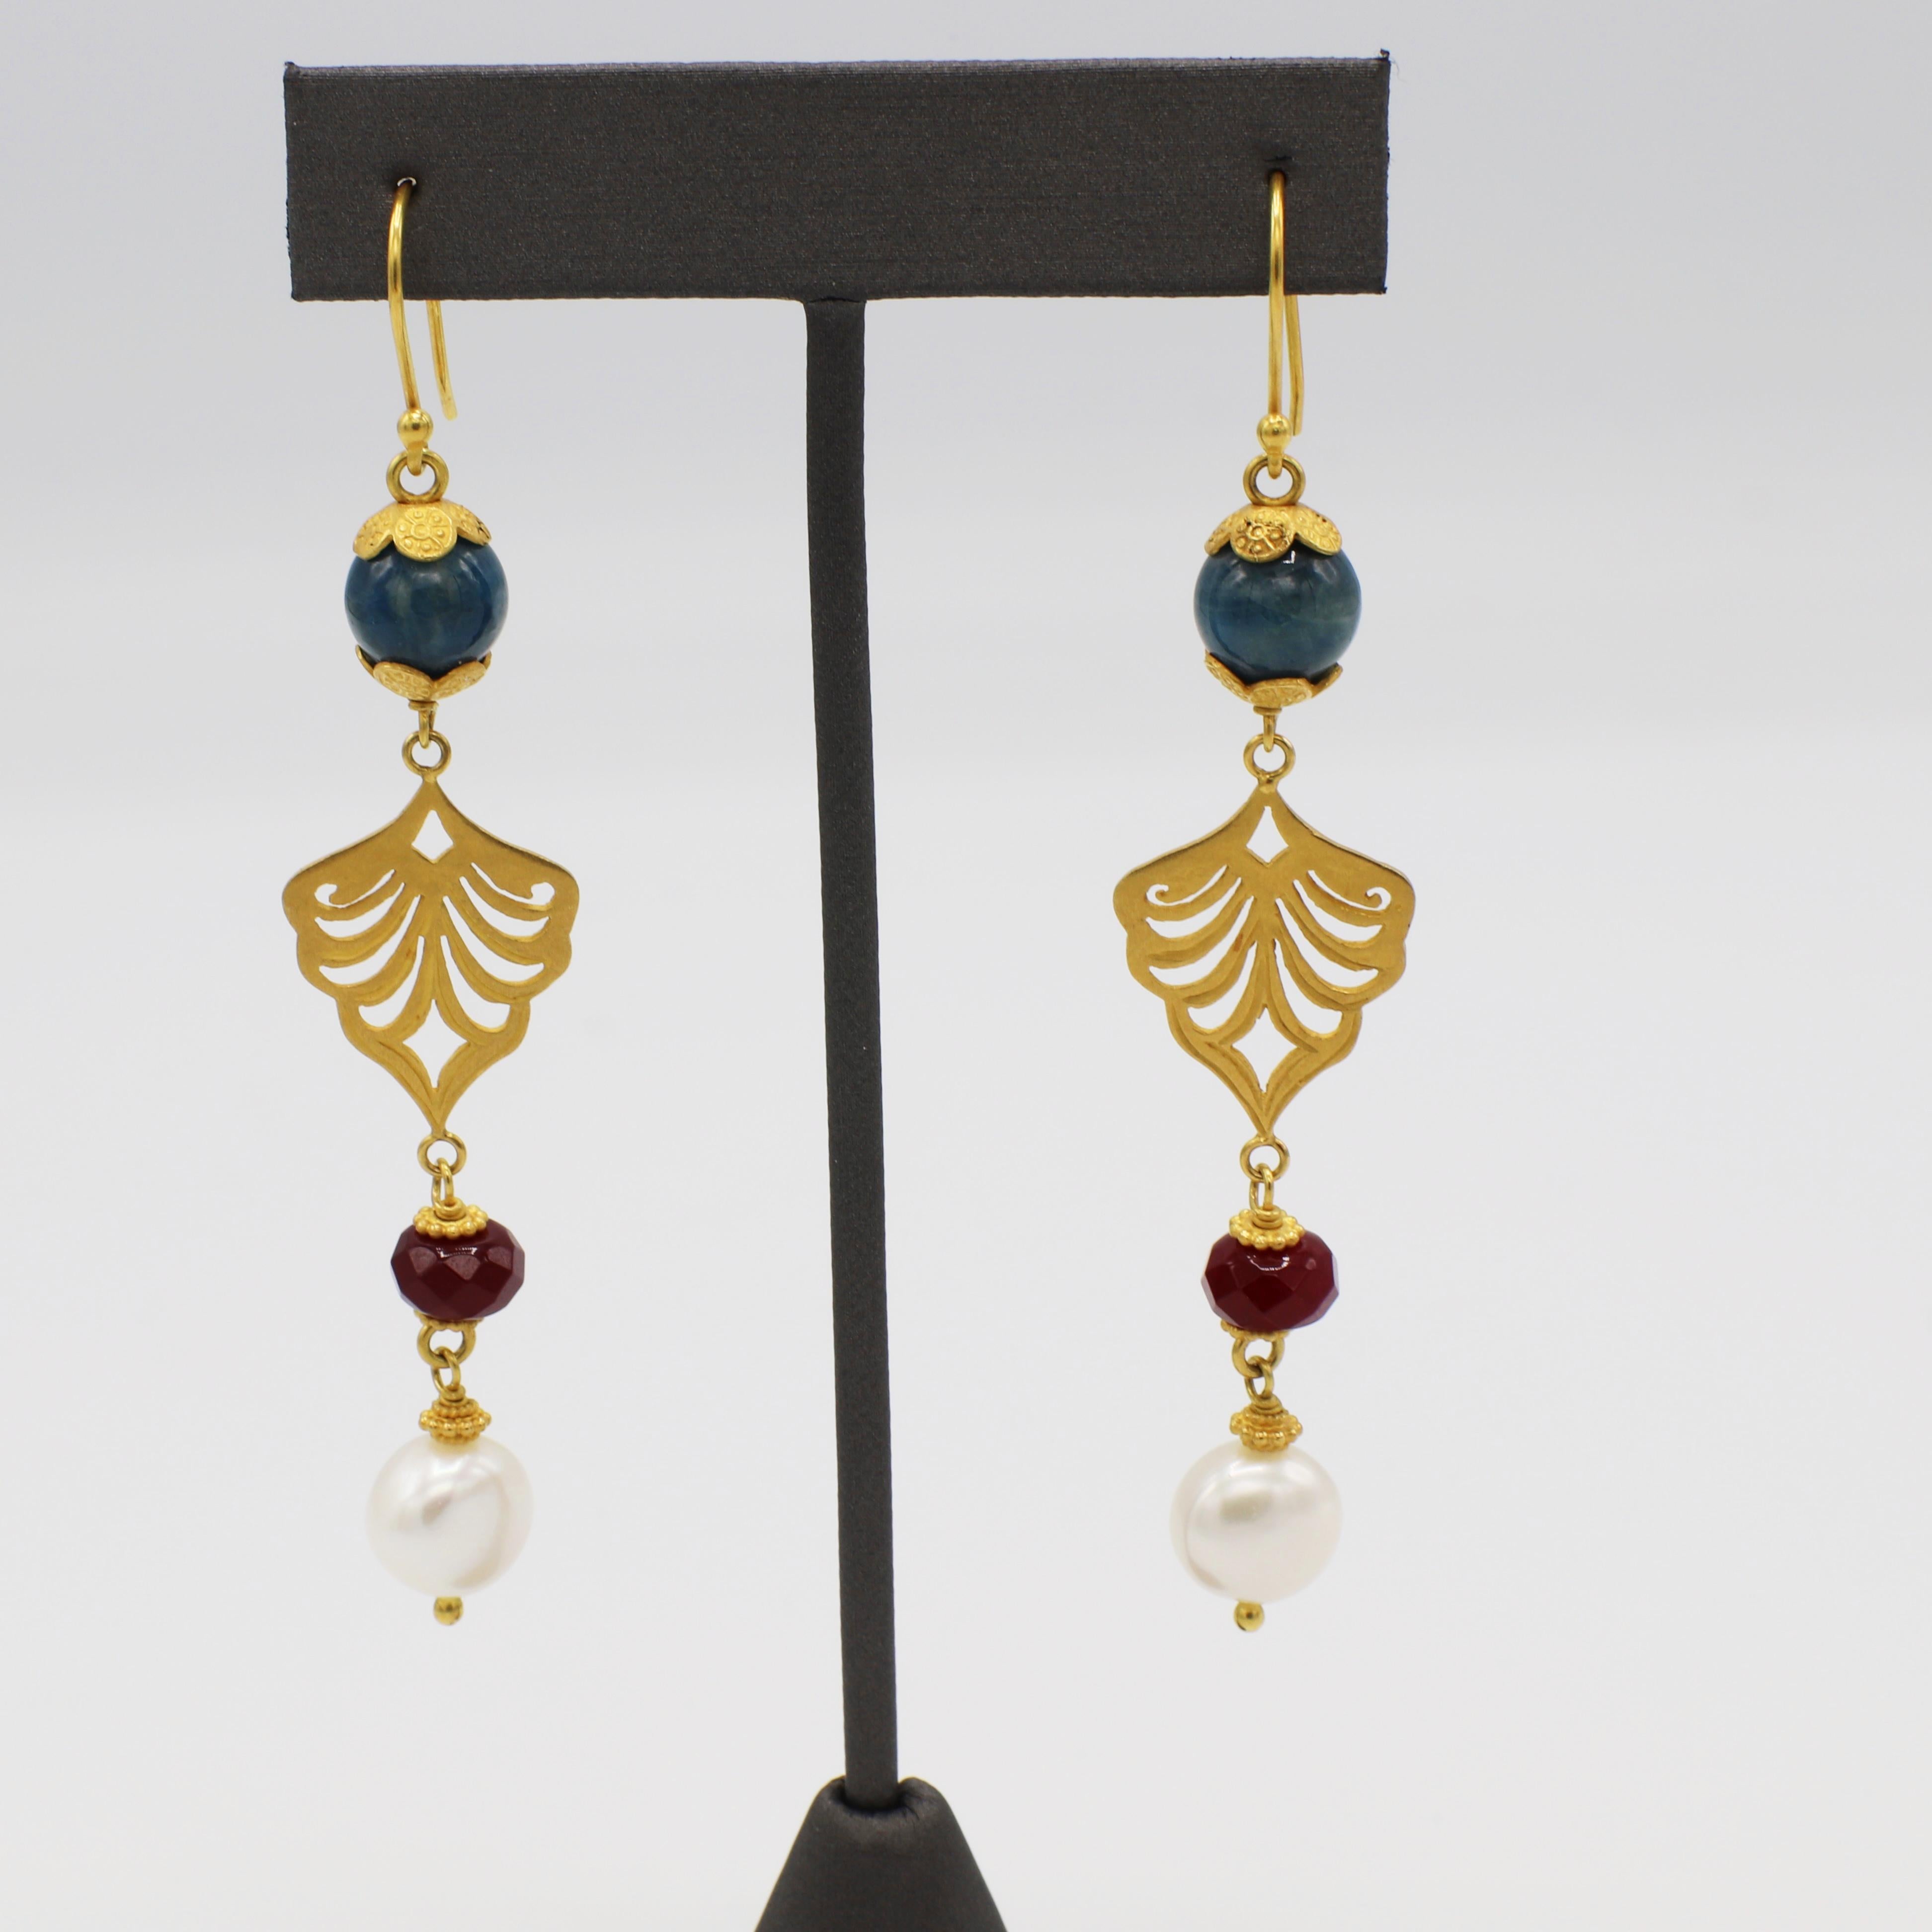 18 Karat Yellow Gold Pearl & Red & Blue Gemstone Dangle Drop Earrings 
Metal: 18k yellow gold
Weight: 15.9 grams
Length: 3 1/2 inches
Width: 3/4 inch 
